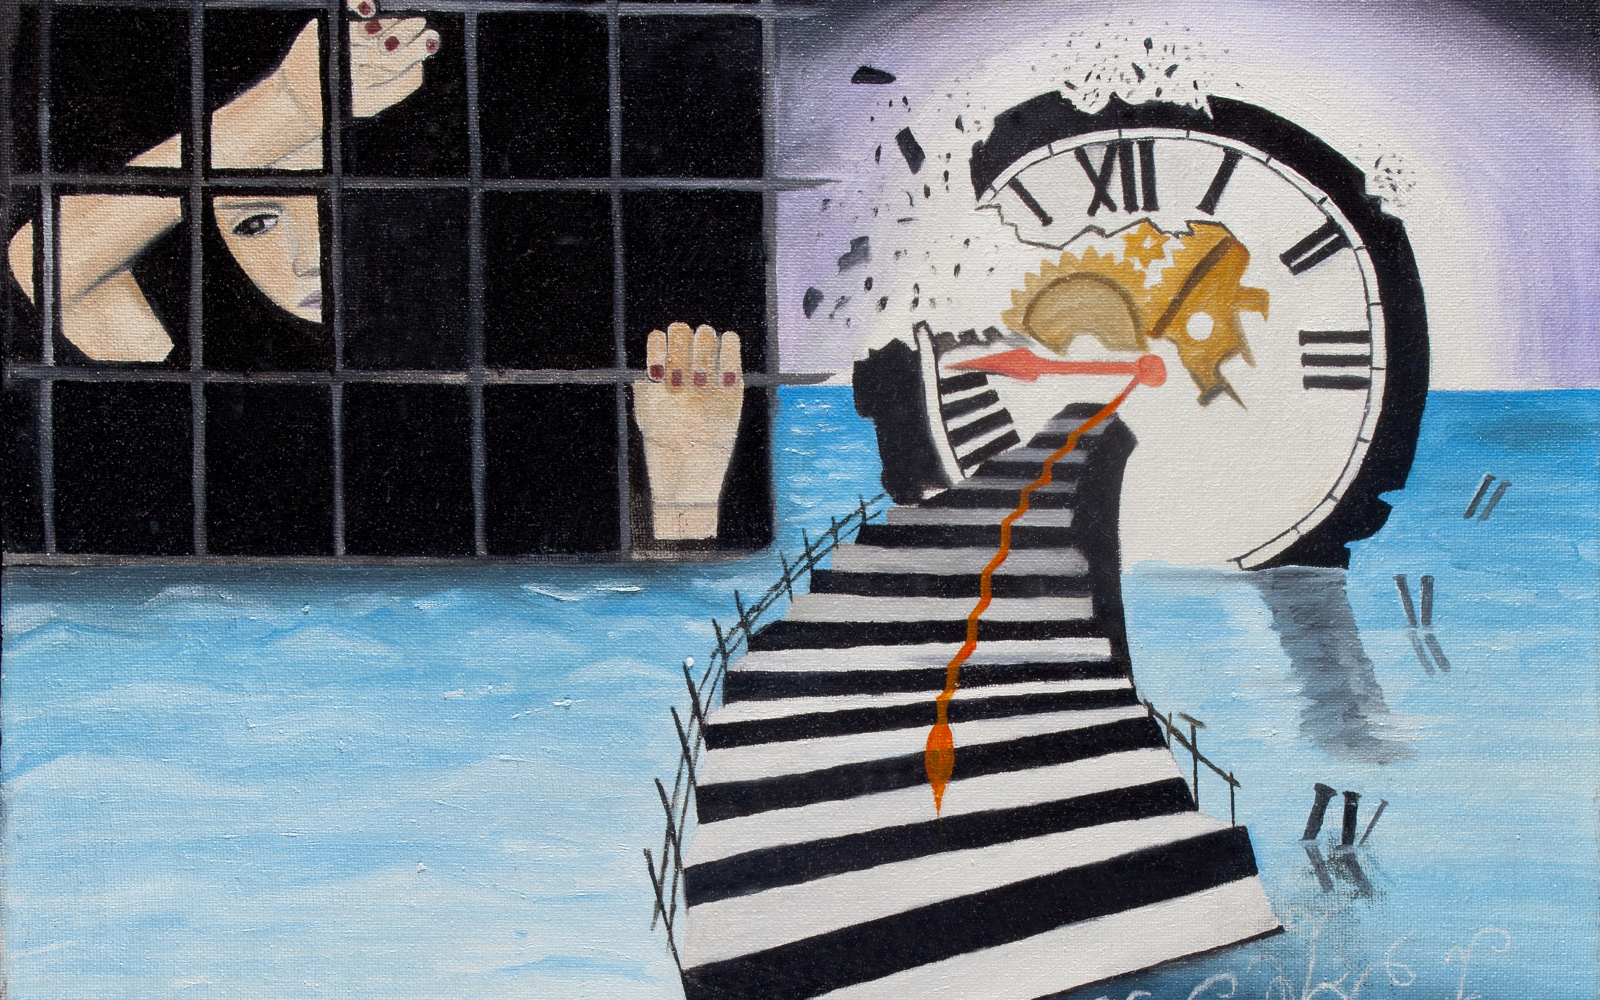 There is a painting of a man holding his head and an abstractly shaped staircase and clock in the background.